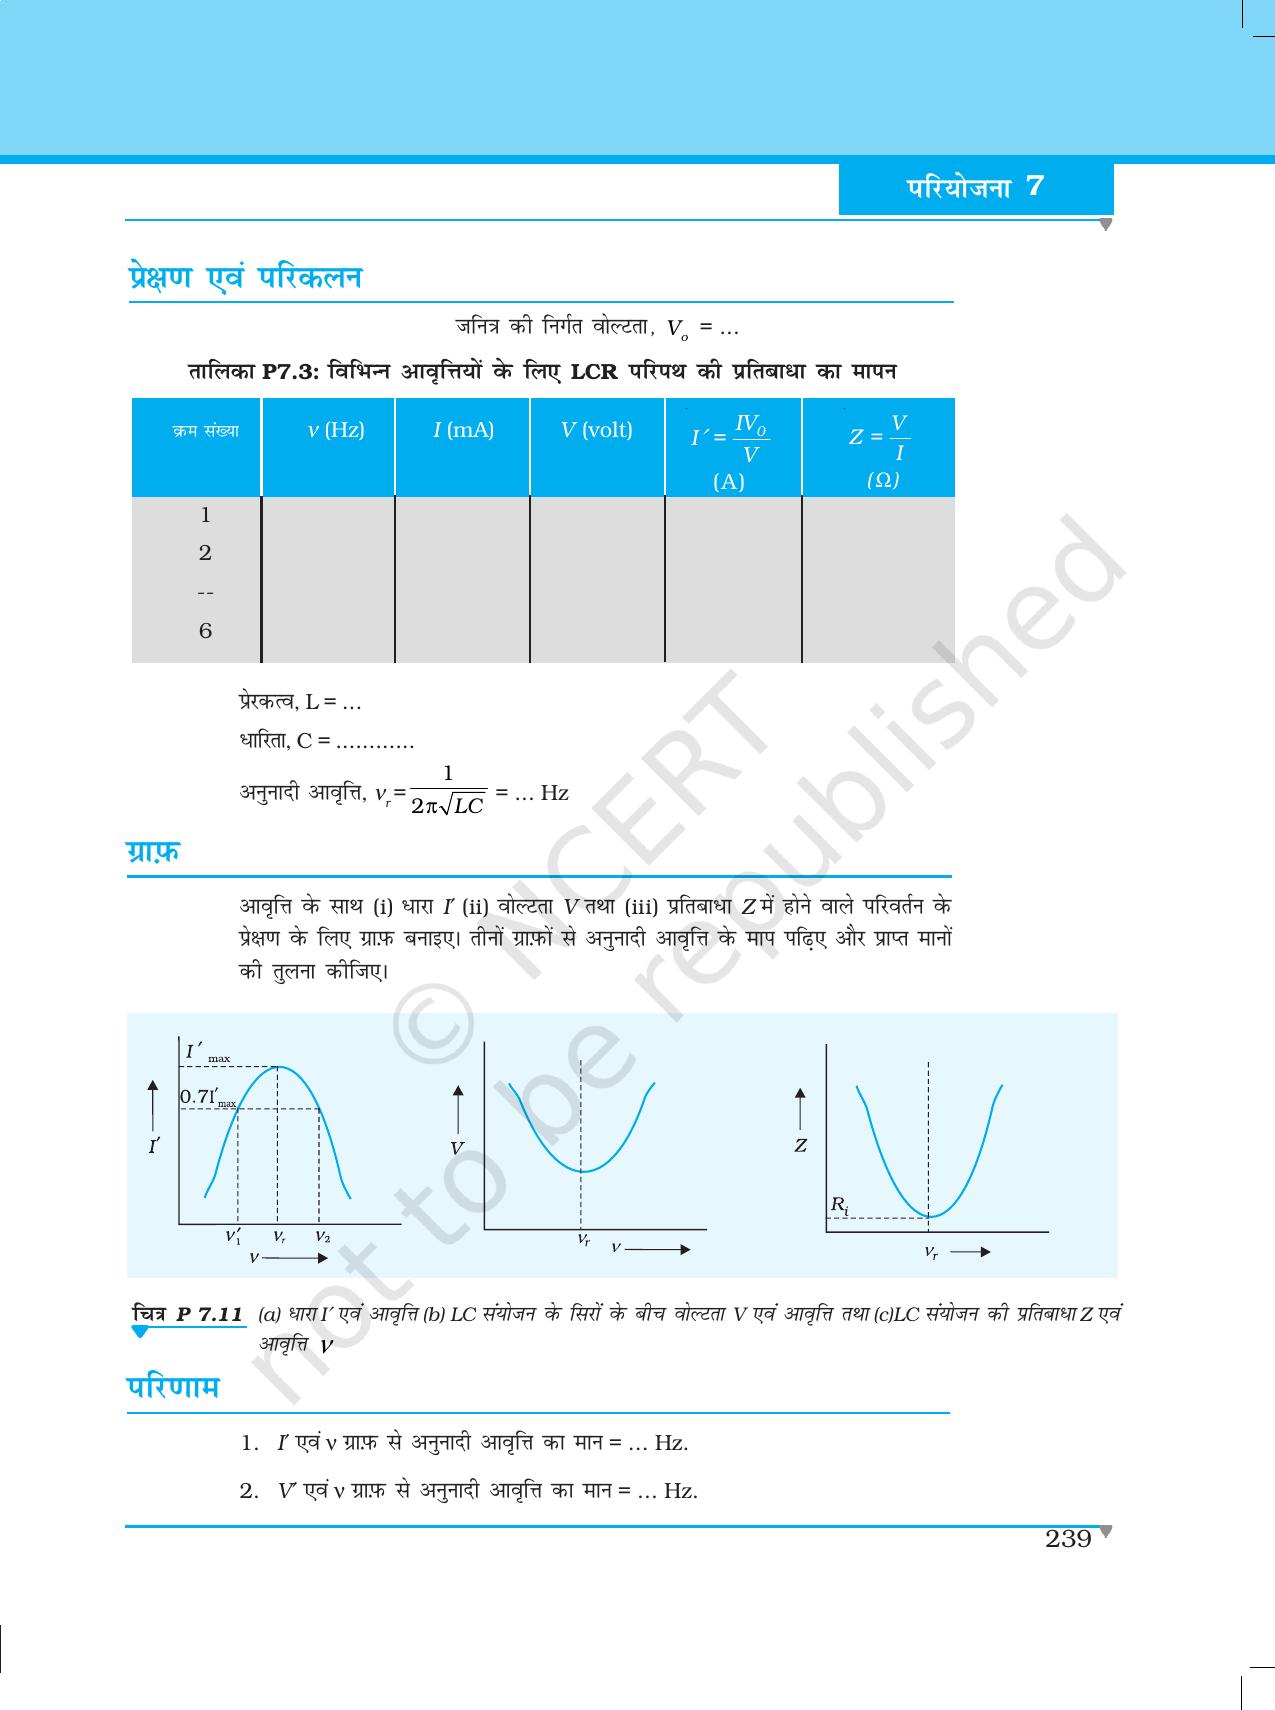 NCERT Laboratory Manuals for Class XII भौतिकी - परियोजना (1 - 7) - Page 33